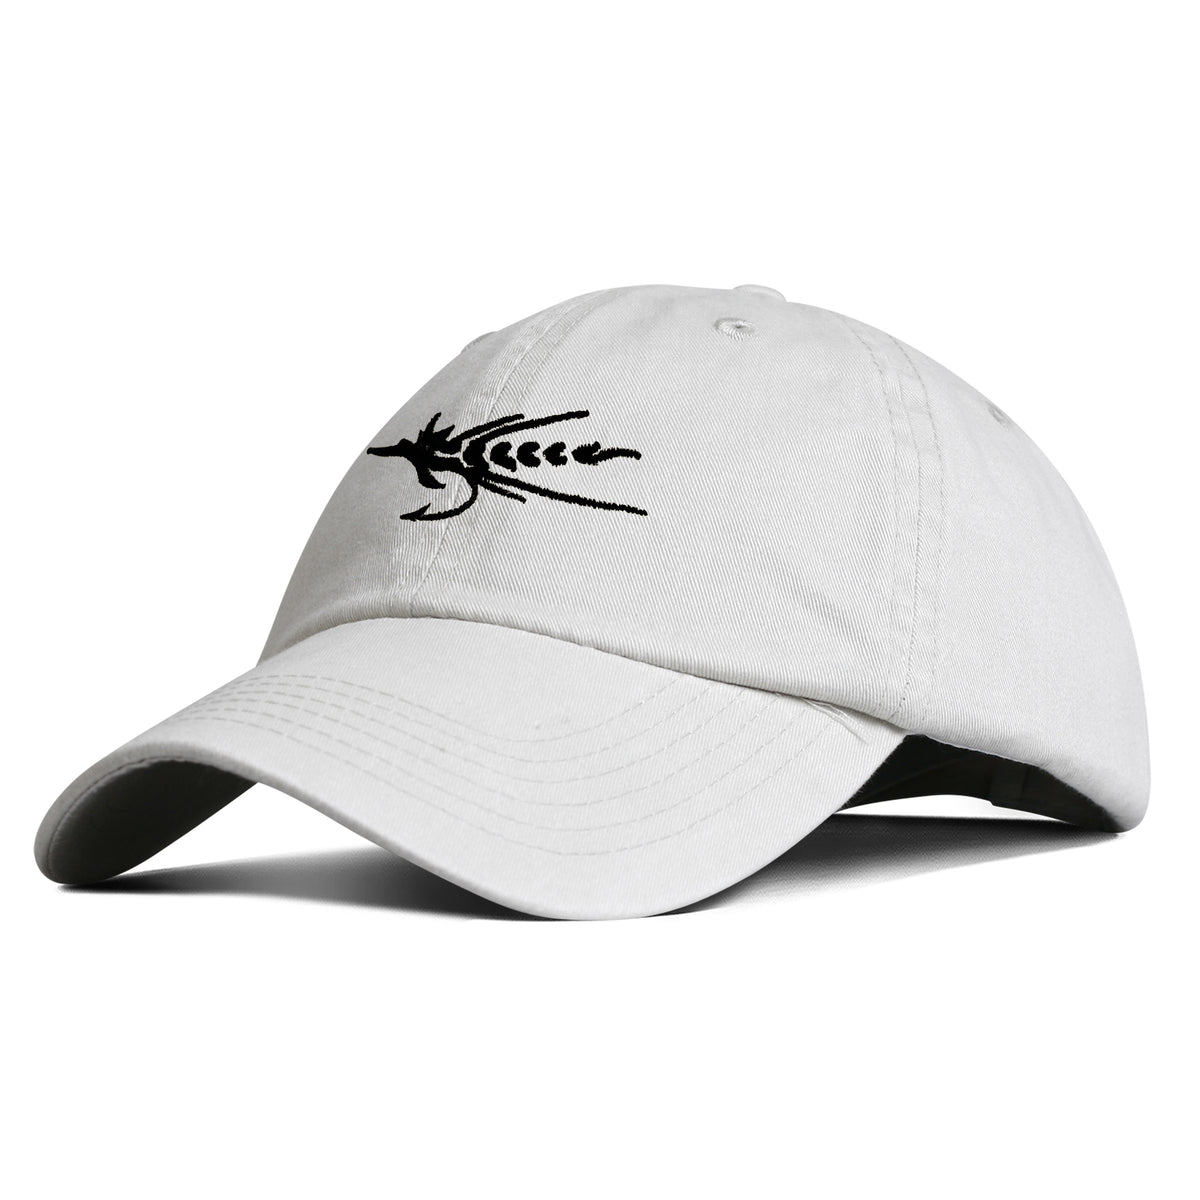 Black Fly Embroidered Hat - Natural